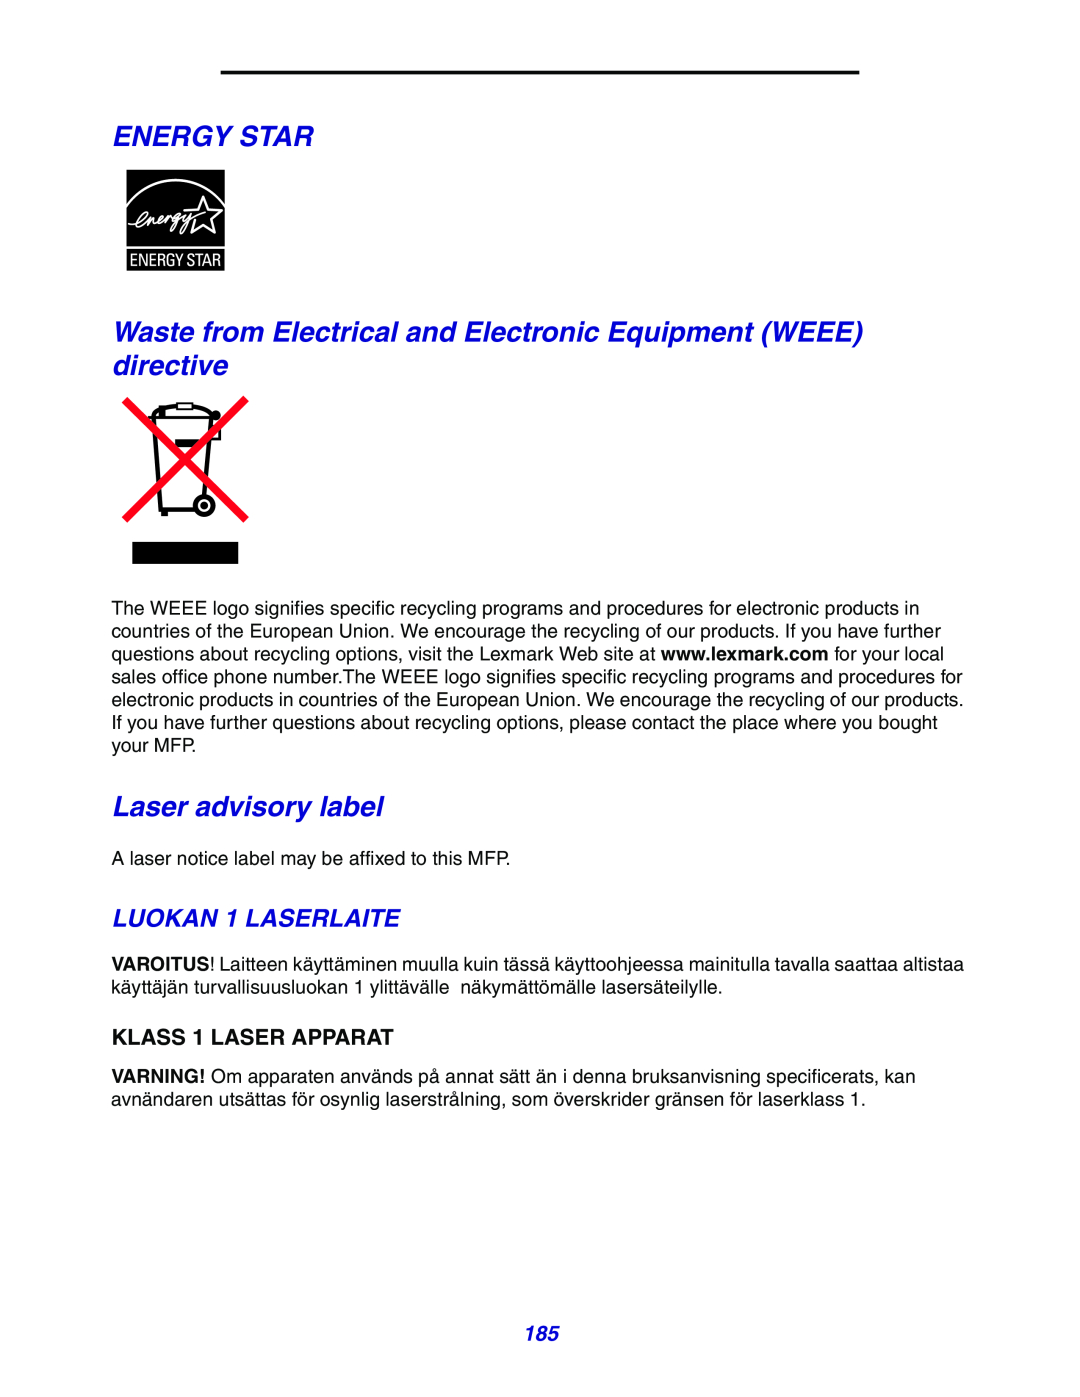 Lexmark X642e manual Energy Star, Waste from Electrical and Electronic Equipment WEEE directive, Laser advisory label 